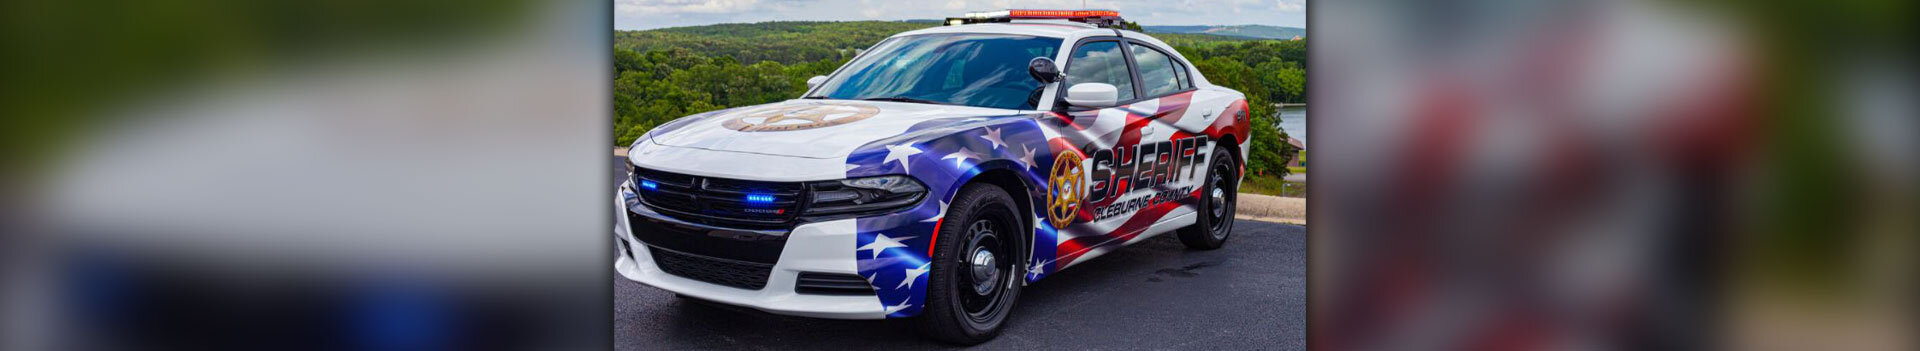 Sheriff vehicle with American flag paint job